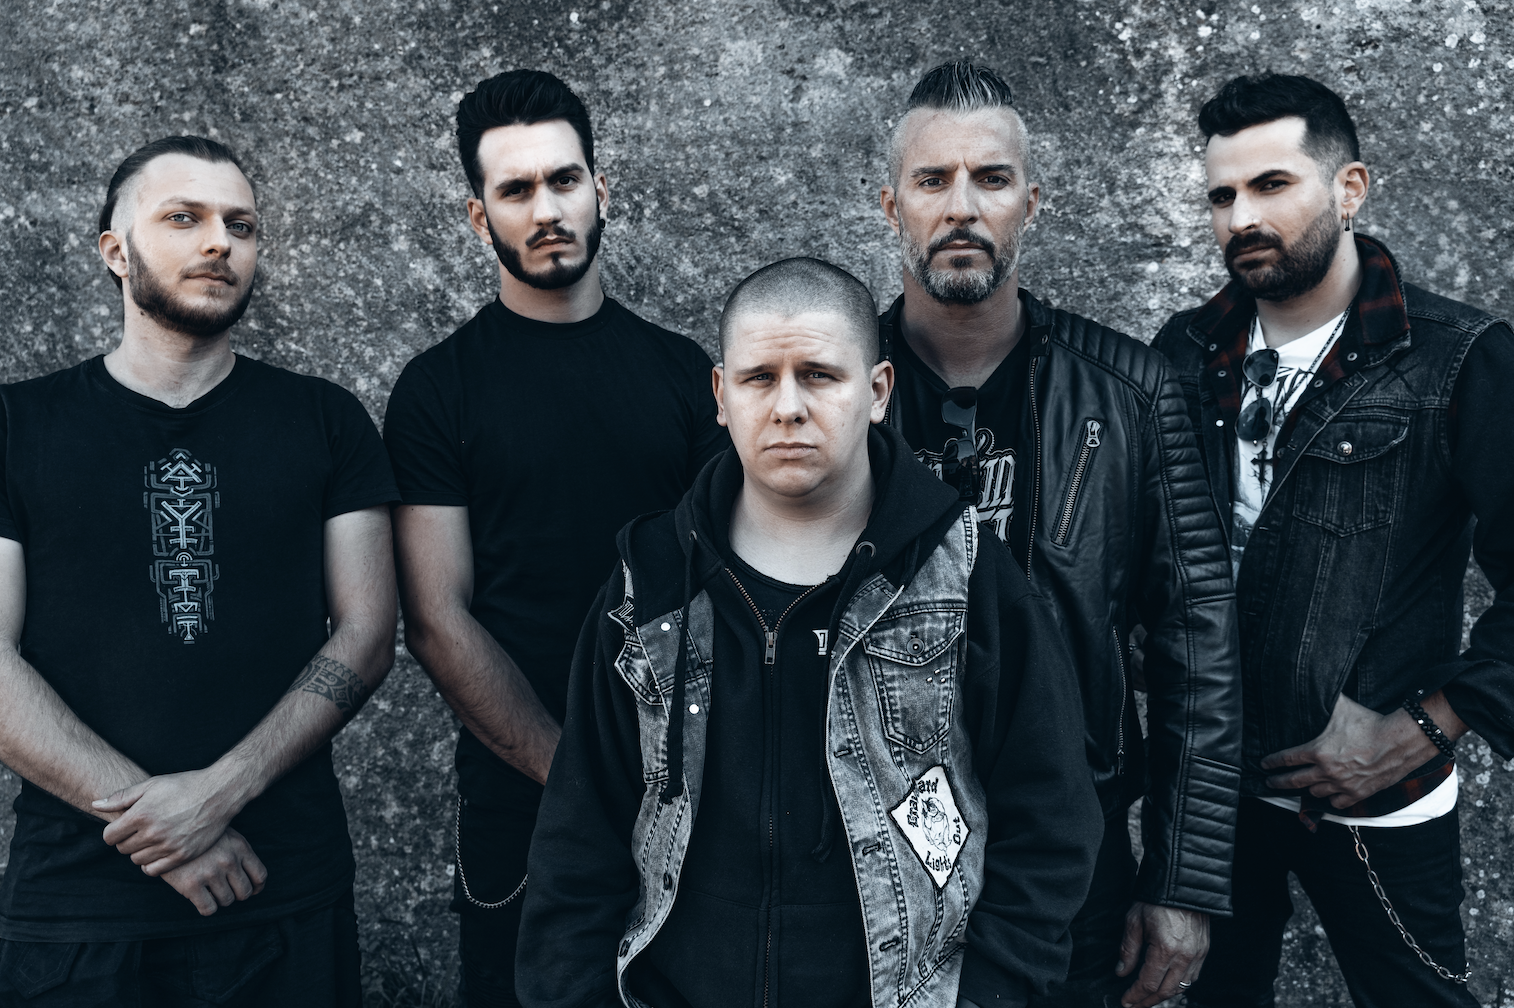 French metal band DISCONNECTED to release new single  “Life will always find its way”